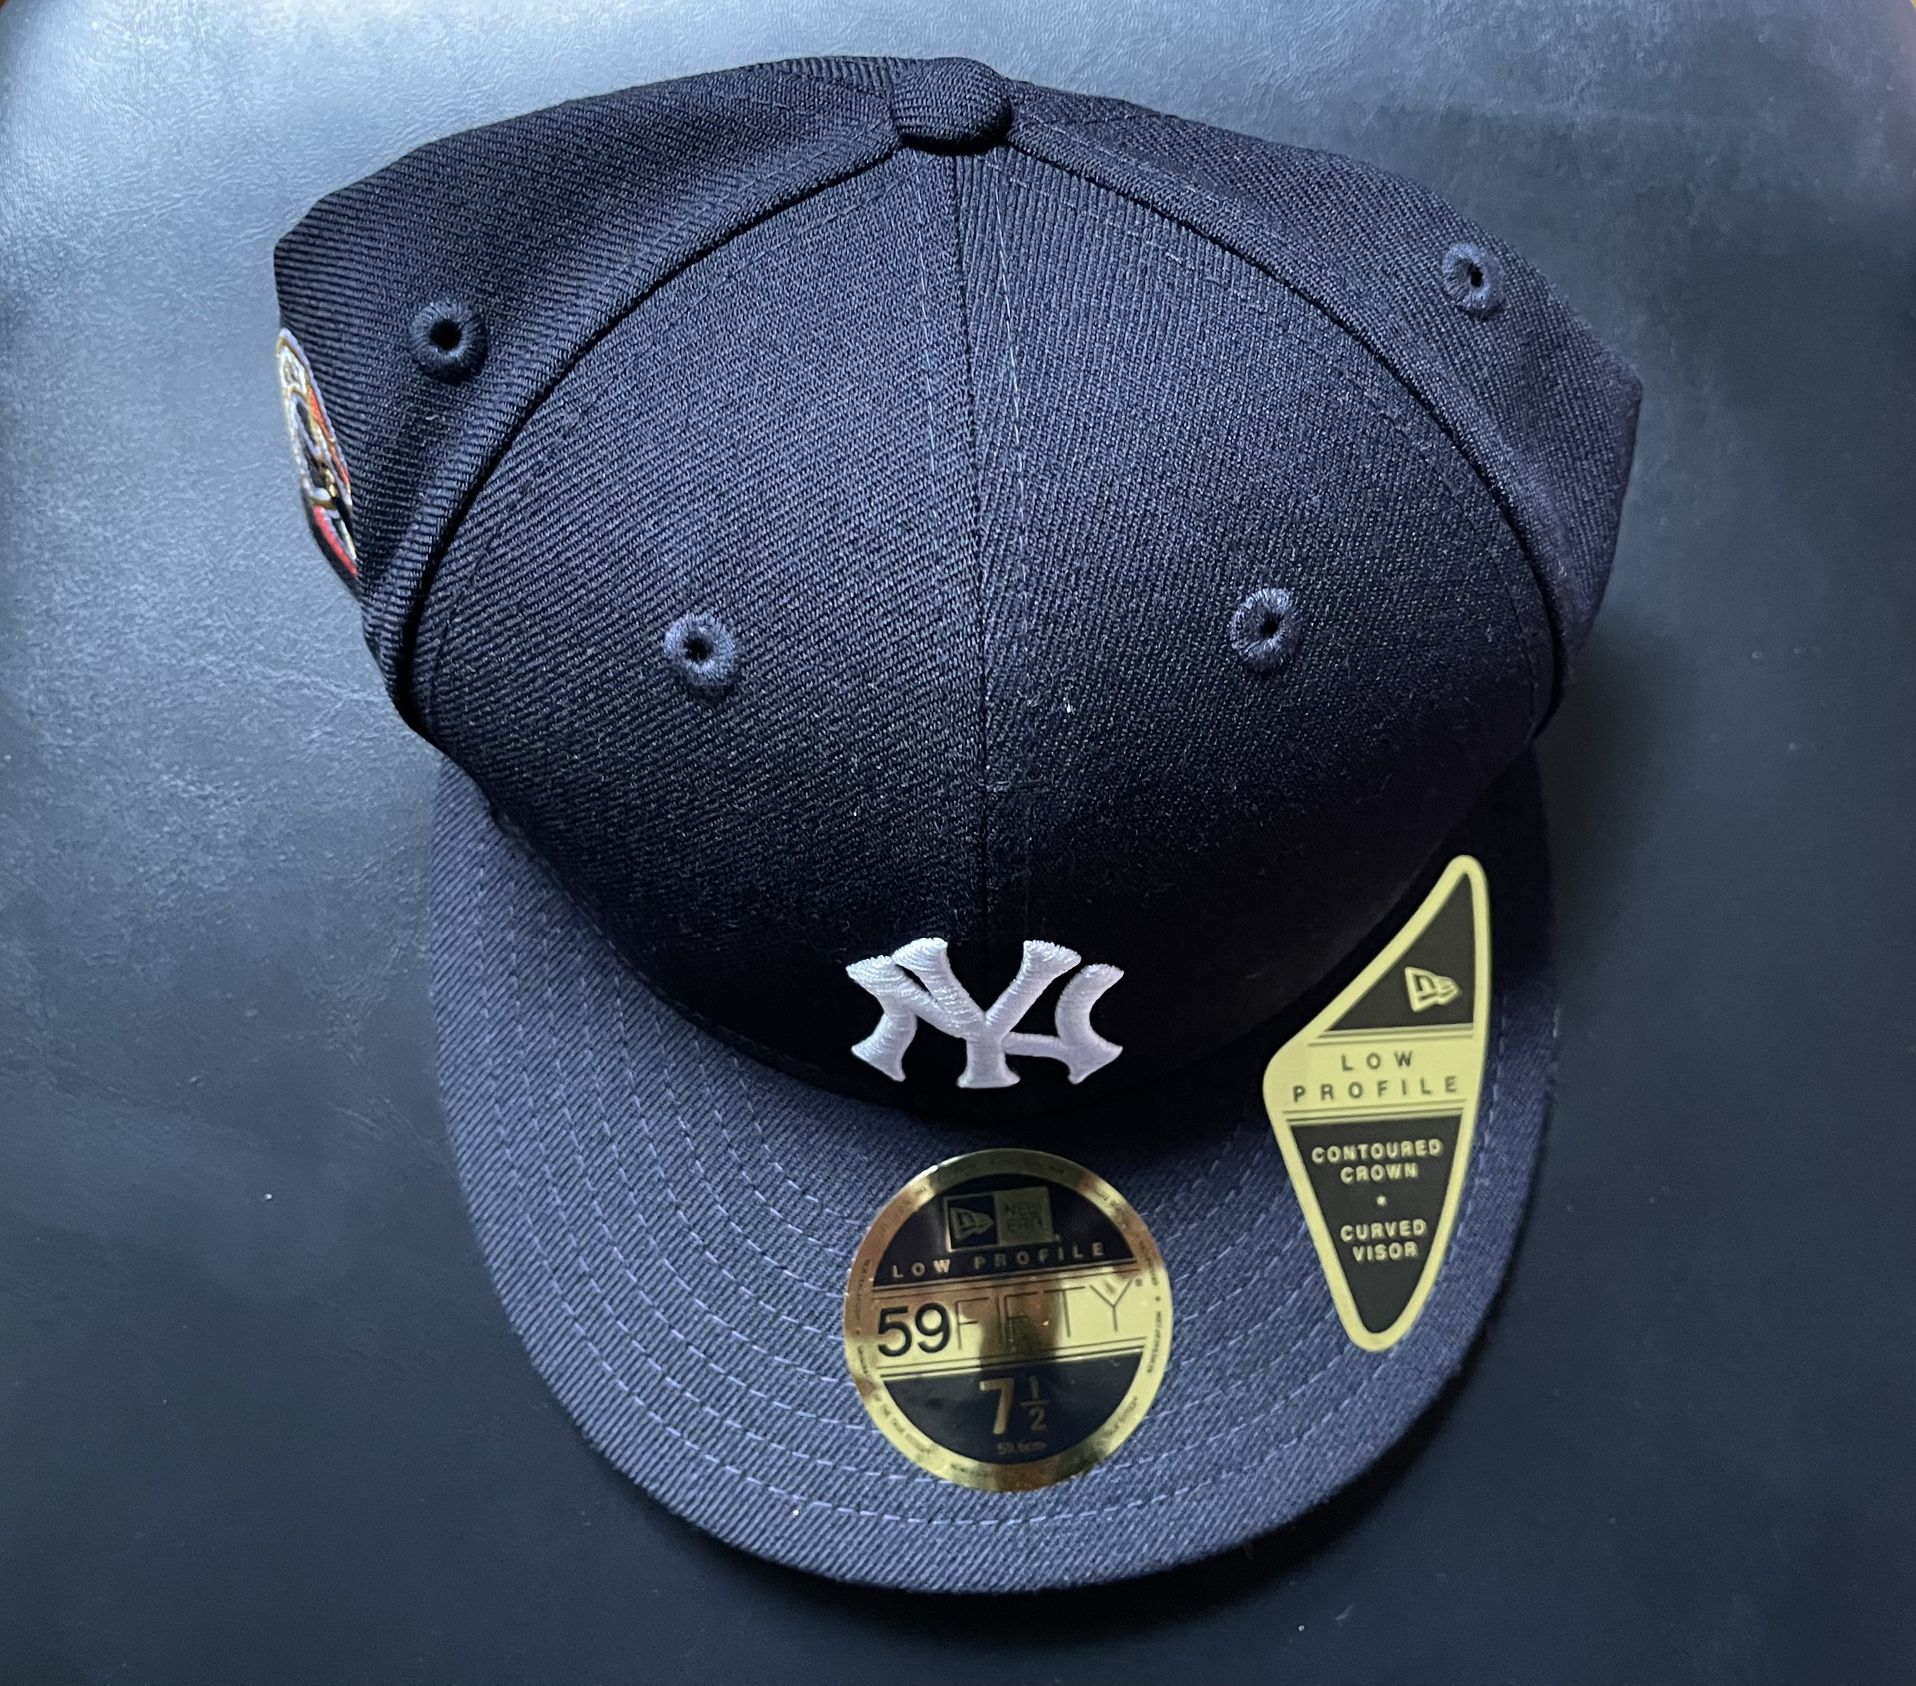 KITH FOR NEW ERA & YANKEES 10 YEAR ANNIVERSARY 1961 WORLD SERIES LOW PROFILE CAP - MAJESTIC-Sz 7 1/2